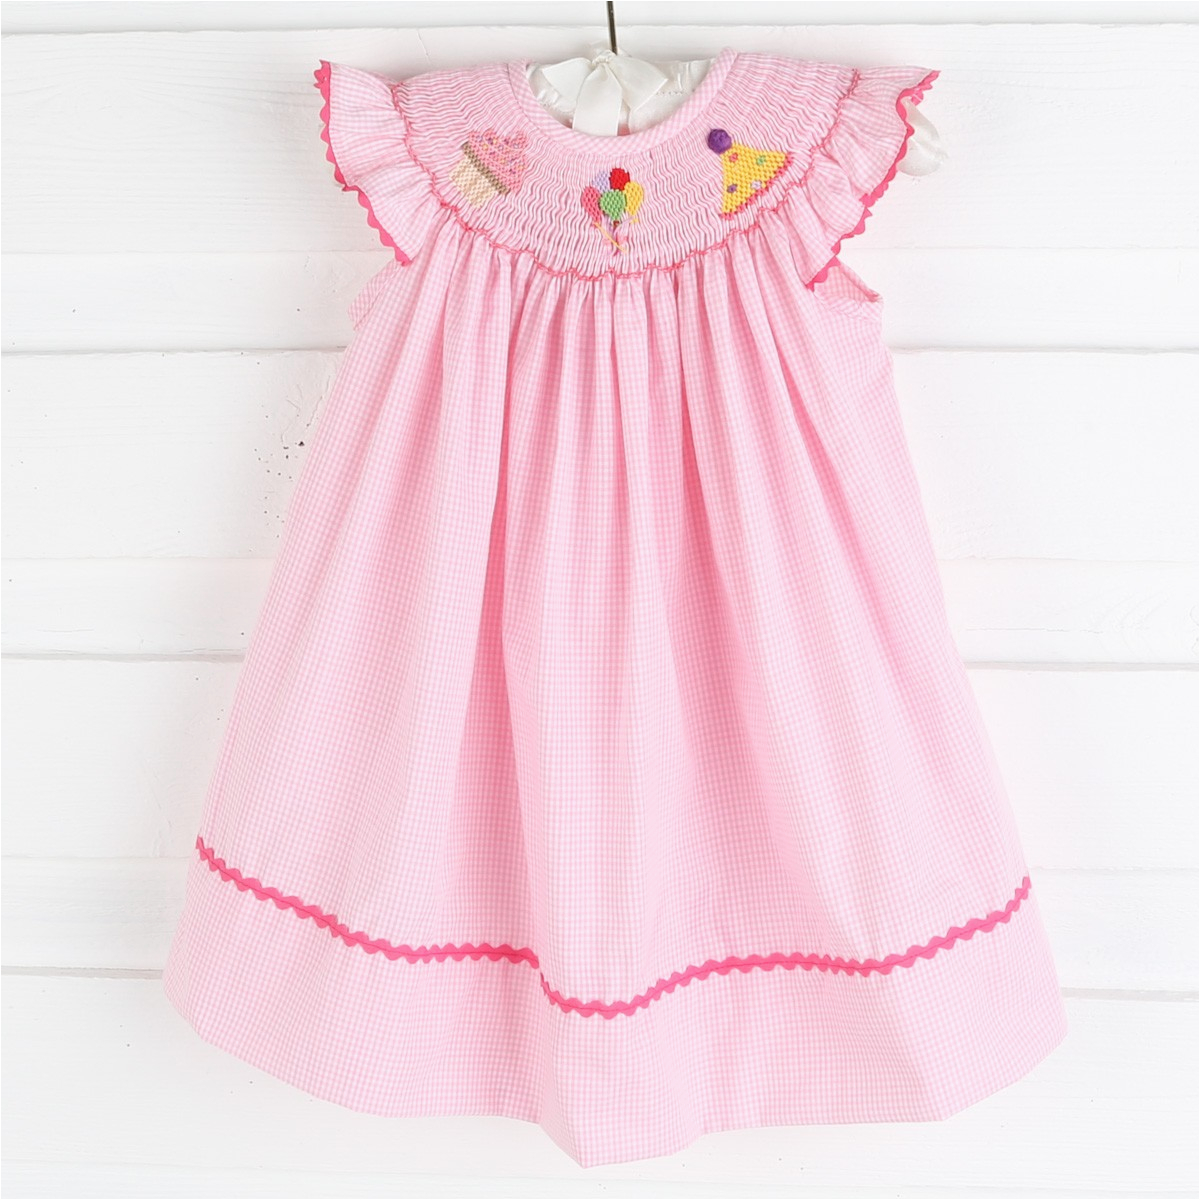 smocked birthday party dress pink gingham